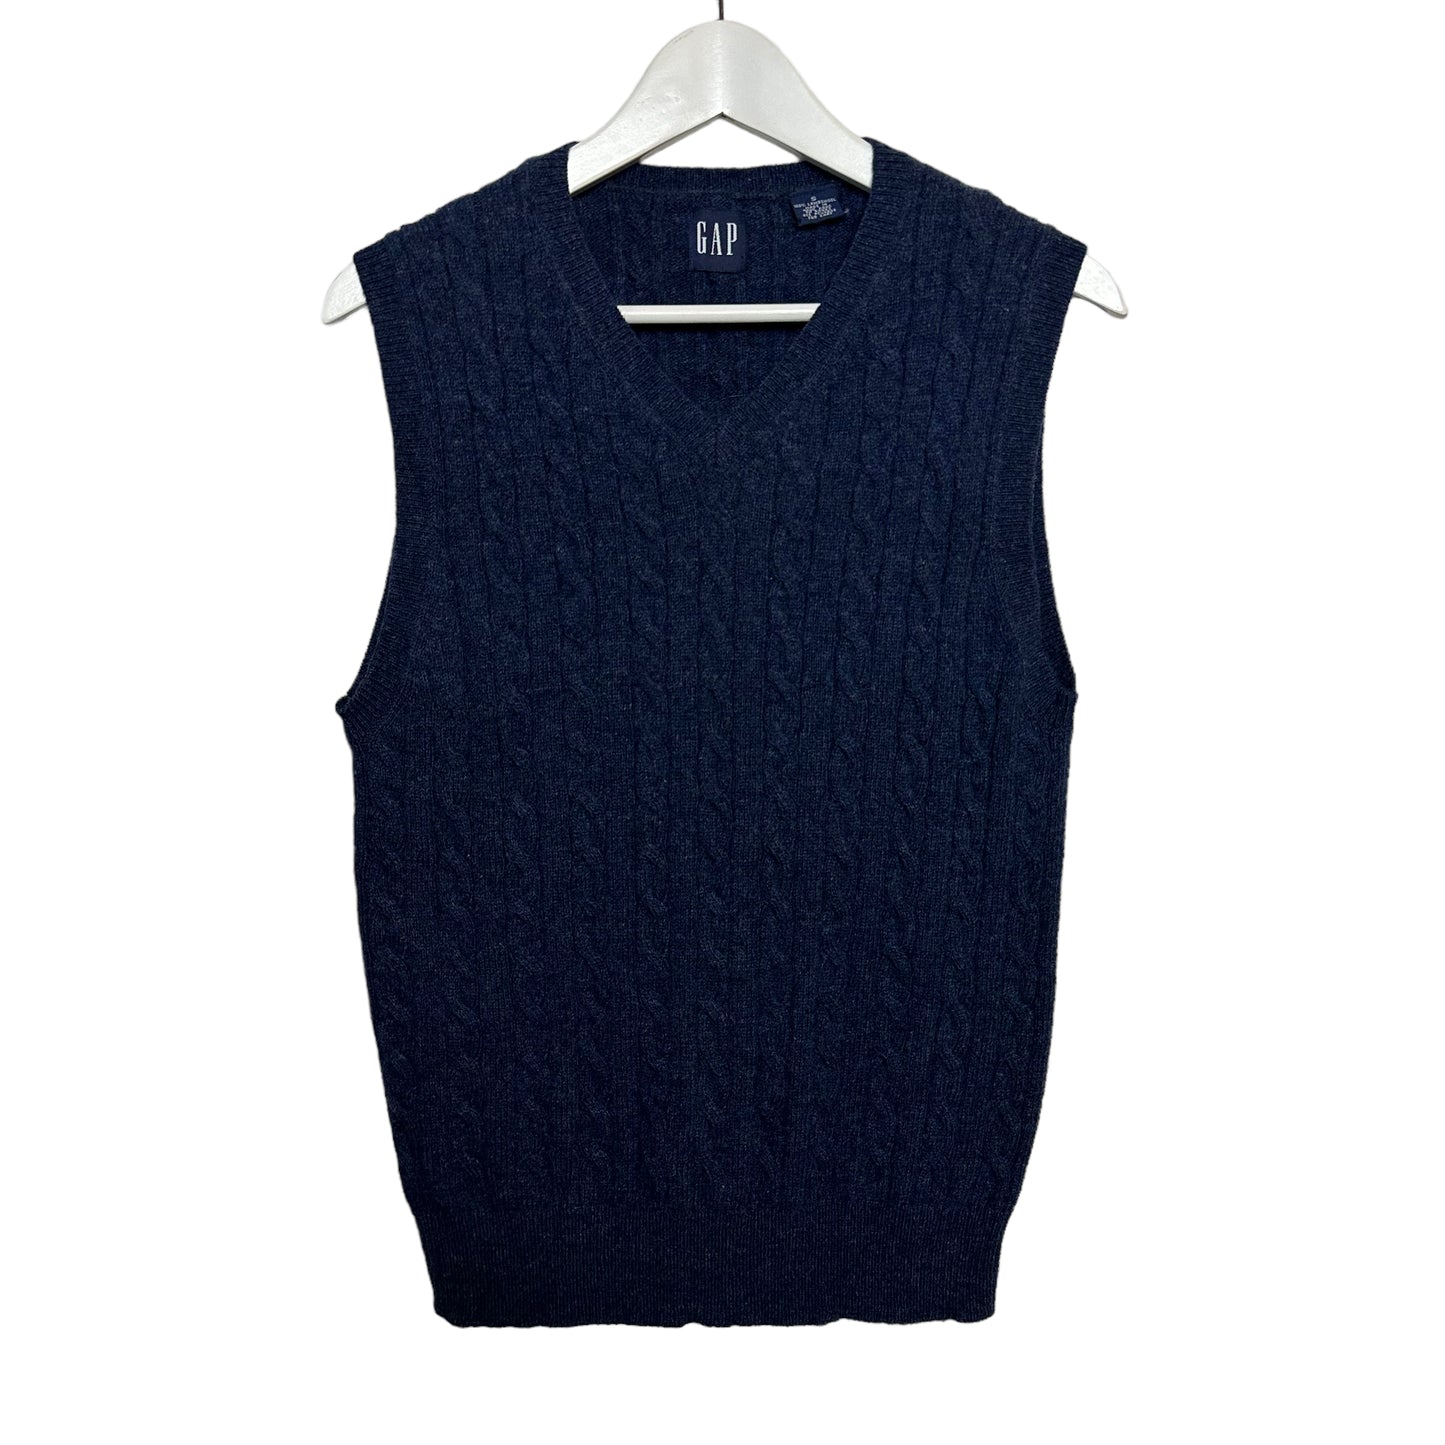 Vintage 90s Gap Cable Knit Sweater Vest Navy Blue 100% Lambswool Small